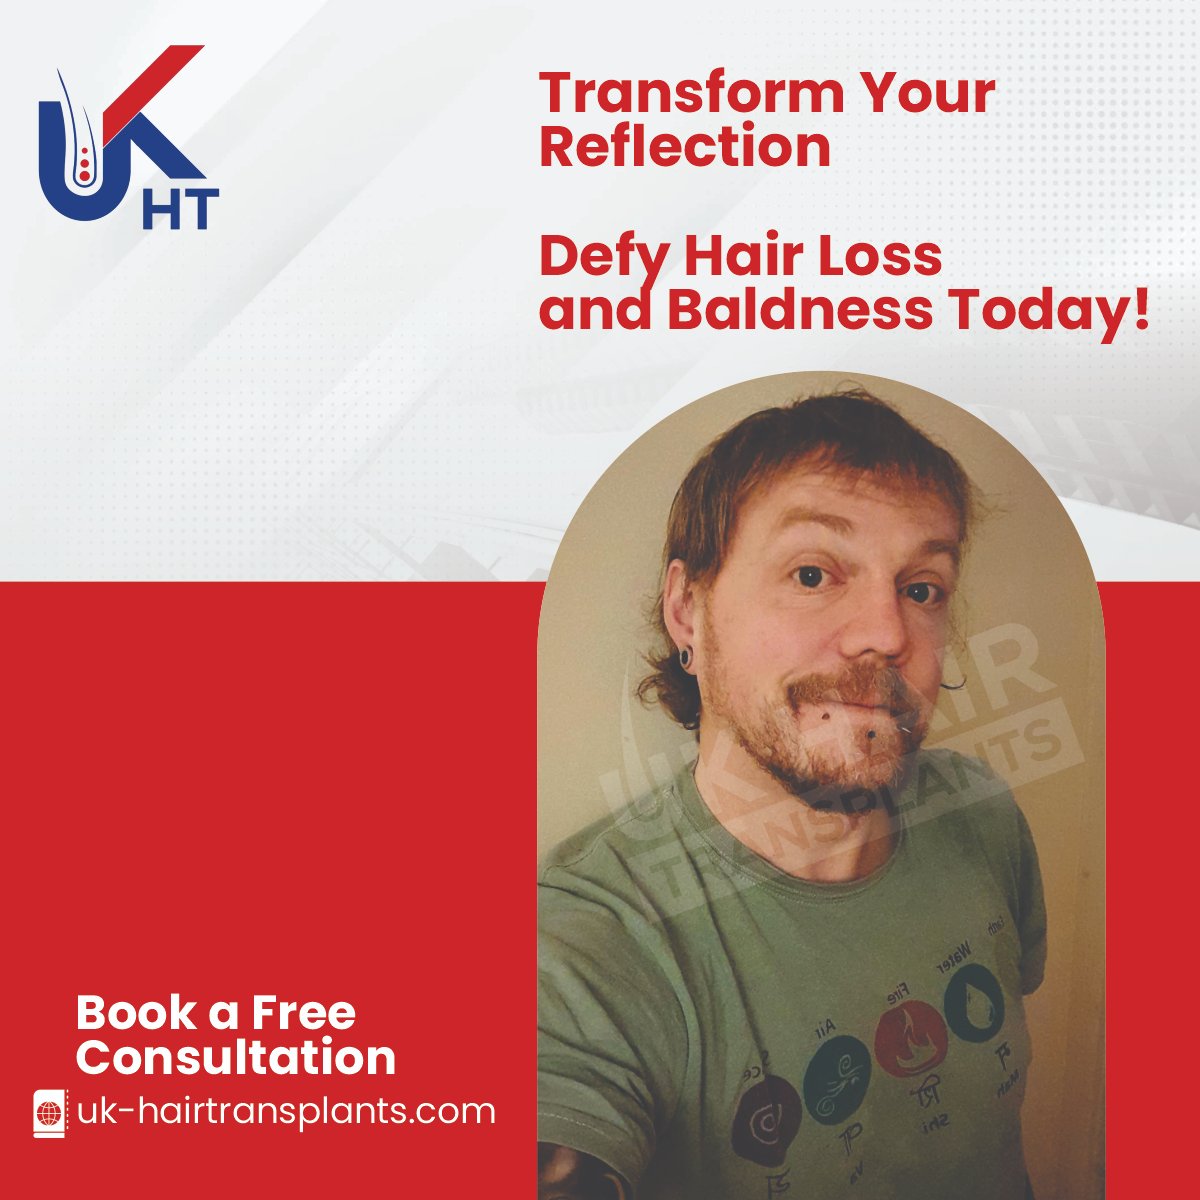 Regain your confidence and redefine your look with our effective solutions to combat hair loss and baldness! 💇‍♂️✨ Say hello to a new chapter of self-assurance and vitality. 

#HairLossSolution #BaldnessNoMore #ConfidenceRestored #HairRestoration #NewBeginnings